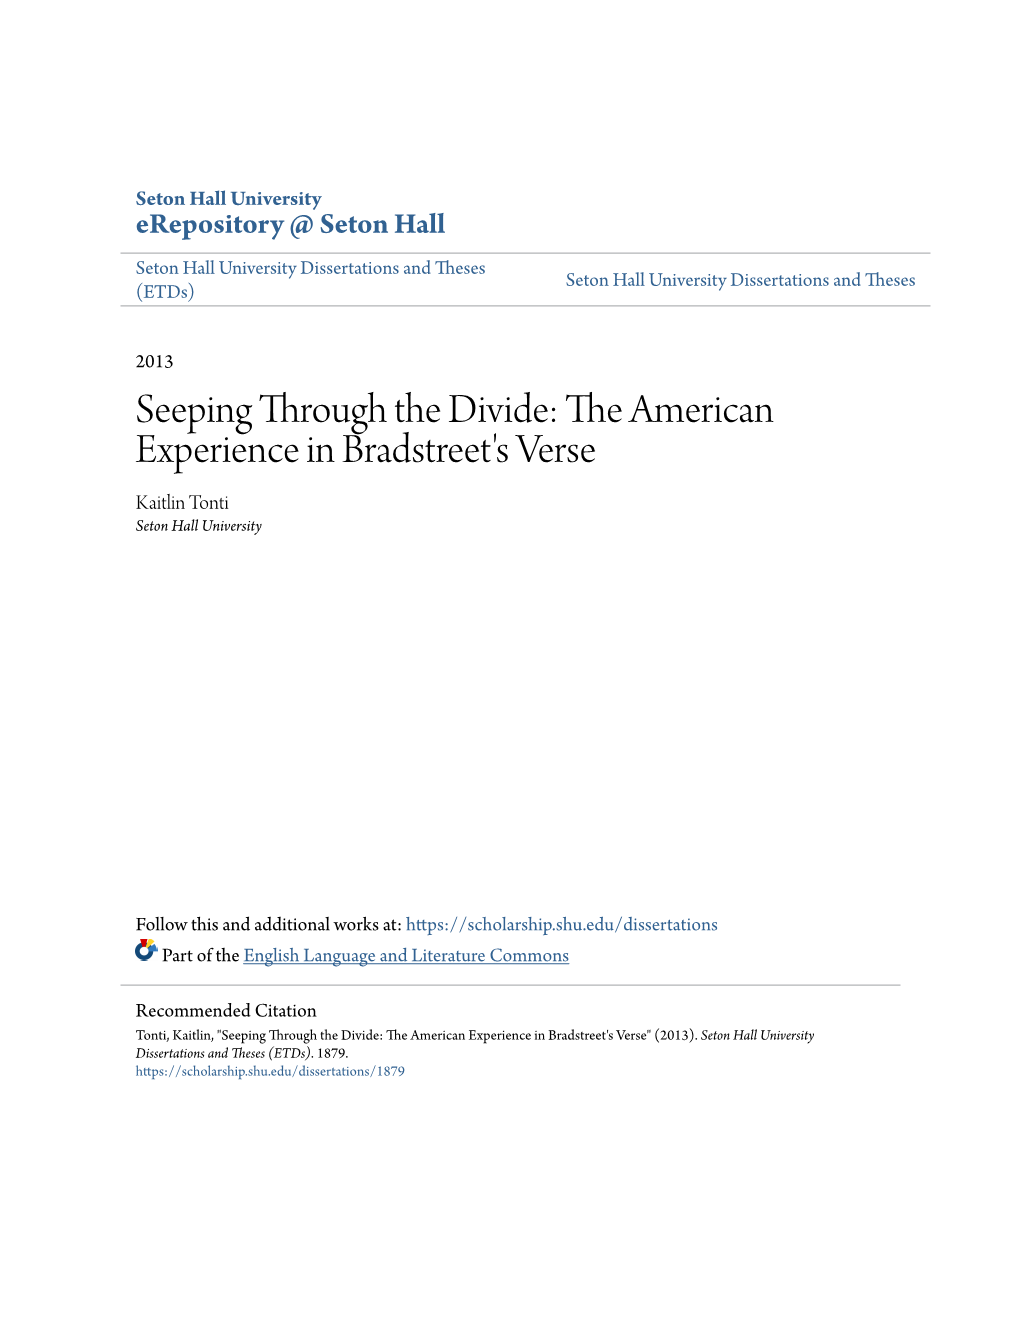 Seeping Through the Divide: the American Experience in Bradstreet's Verse Kaitlin Tonti Seton Hall University